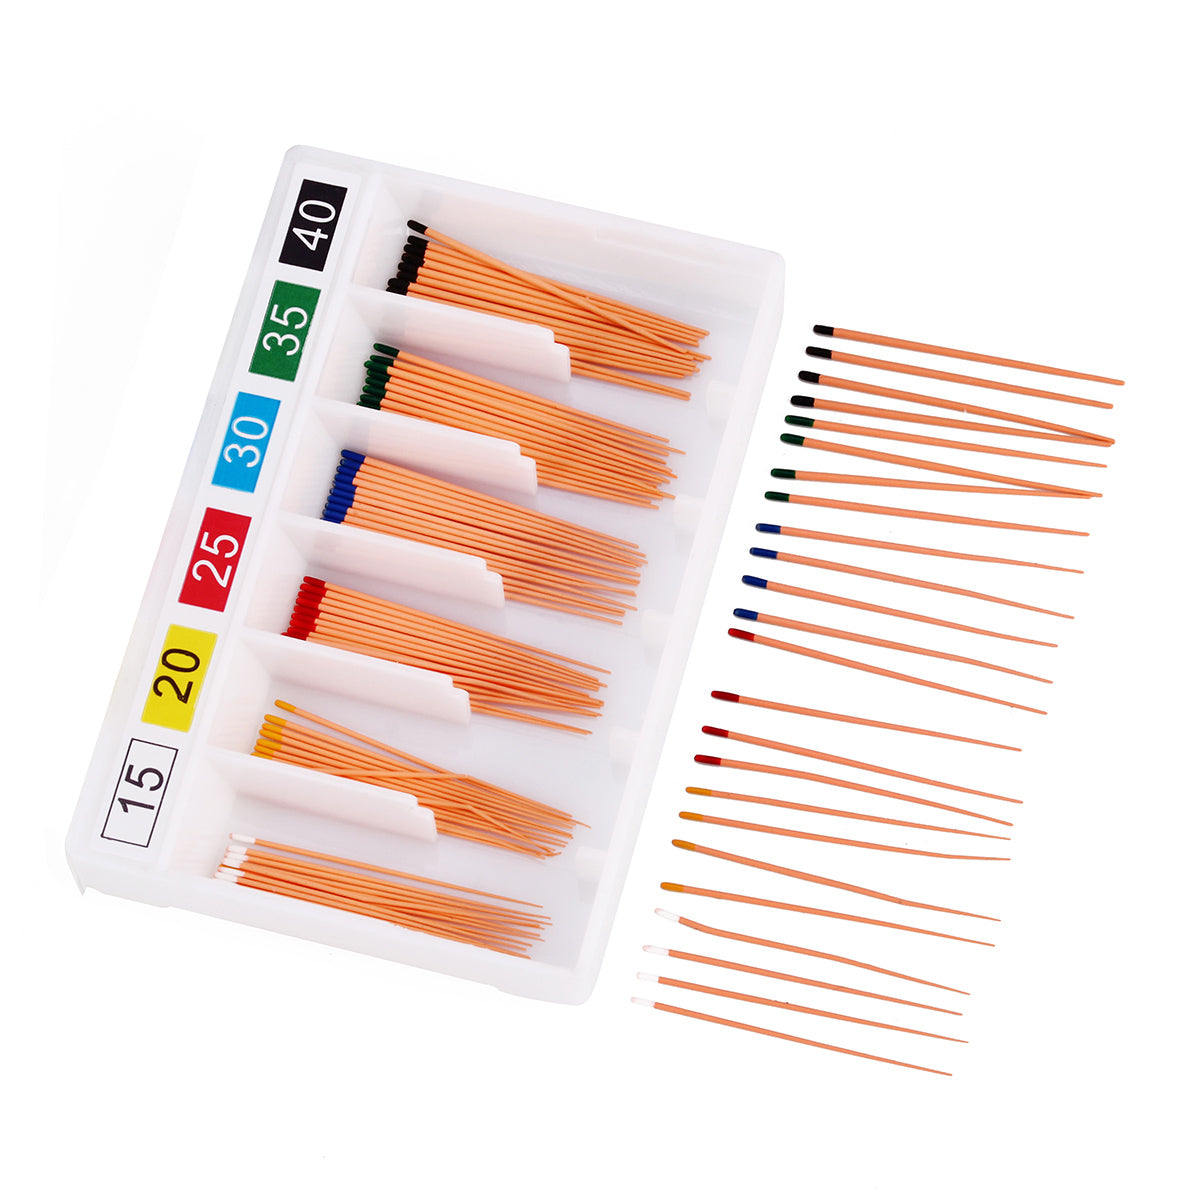 Dental Gutta Percha Points 0.02 Taper Assorted 15-40# Color Coded 120pcs/Pack - pairaydental.com